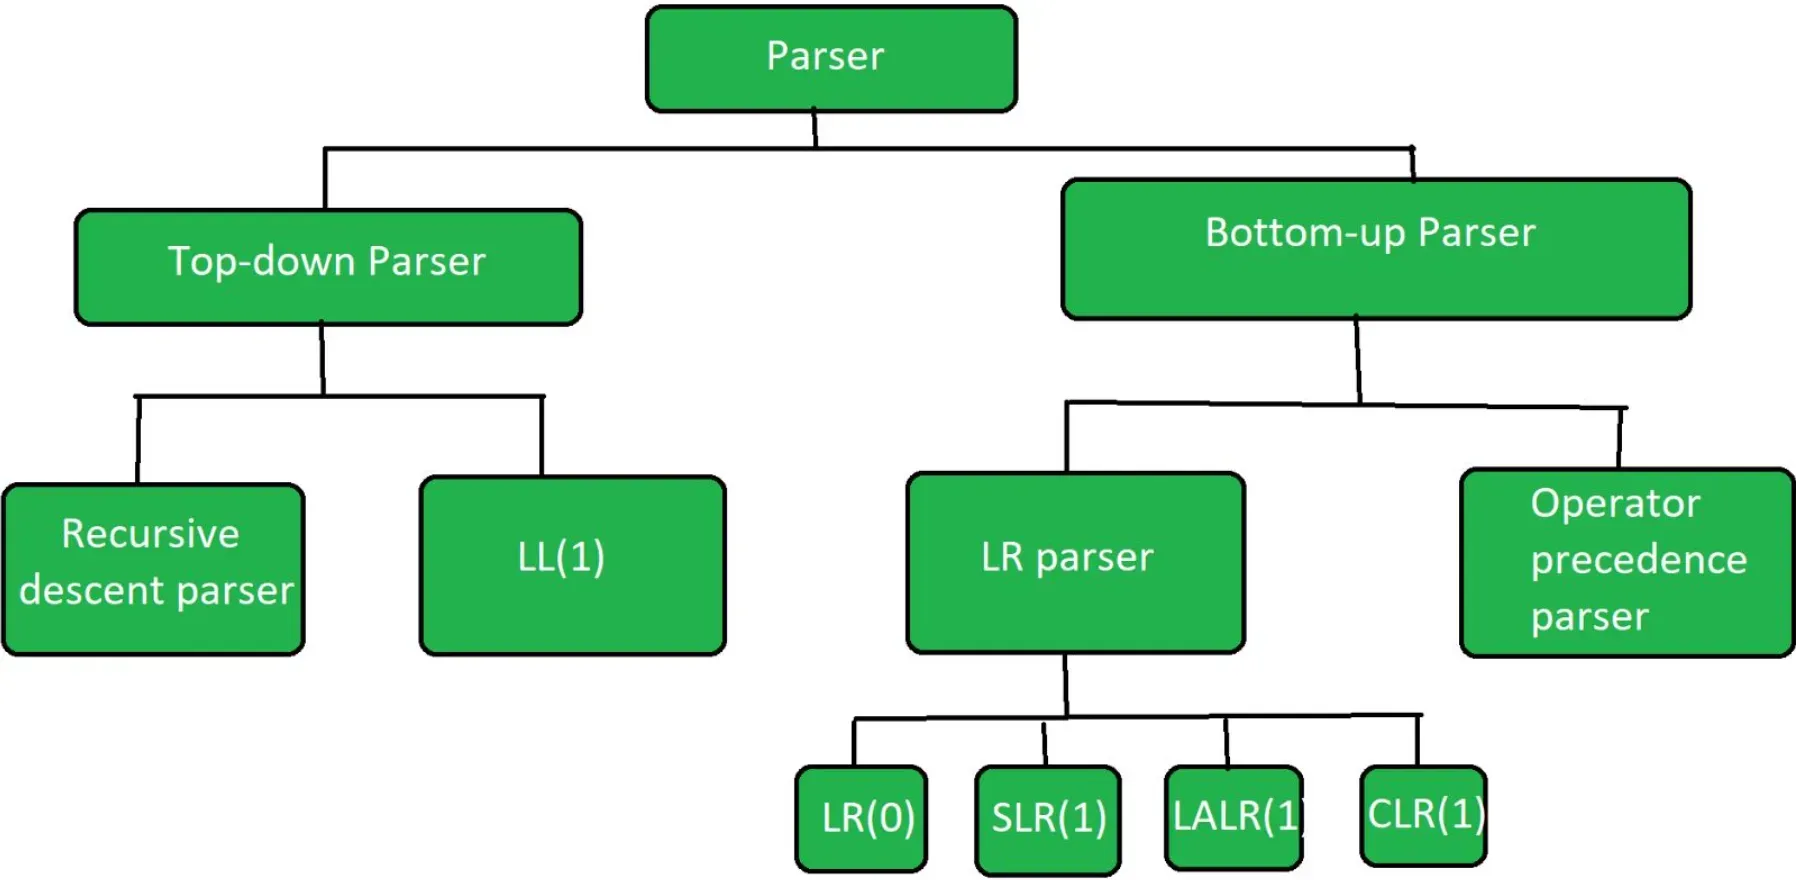 Where is Parsing Used?